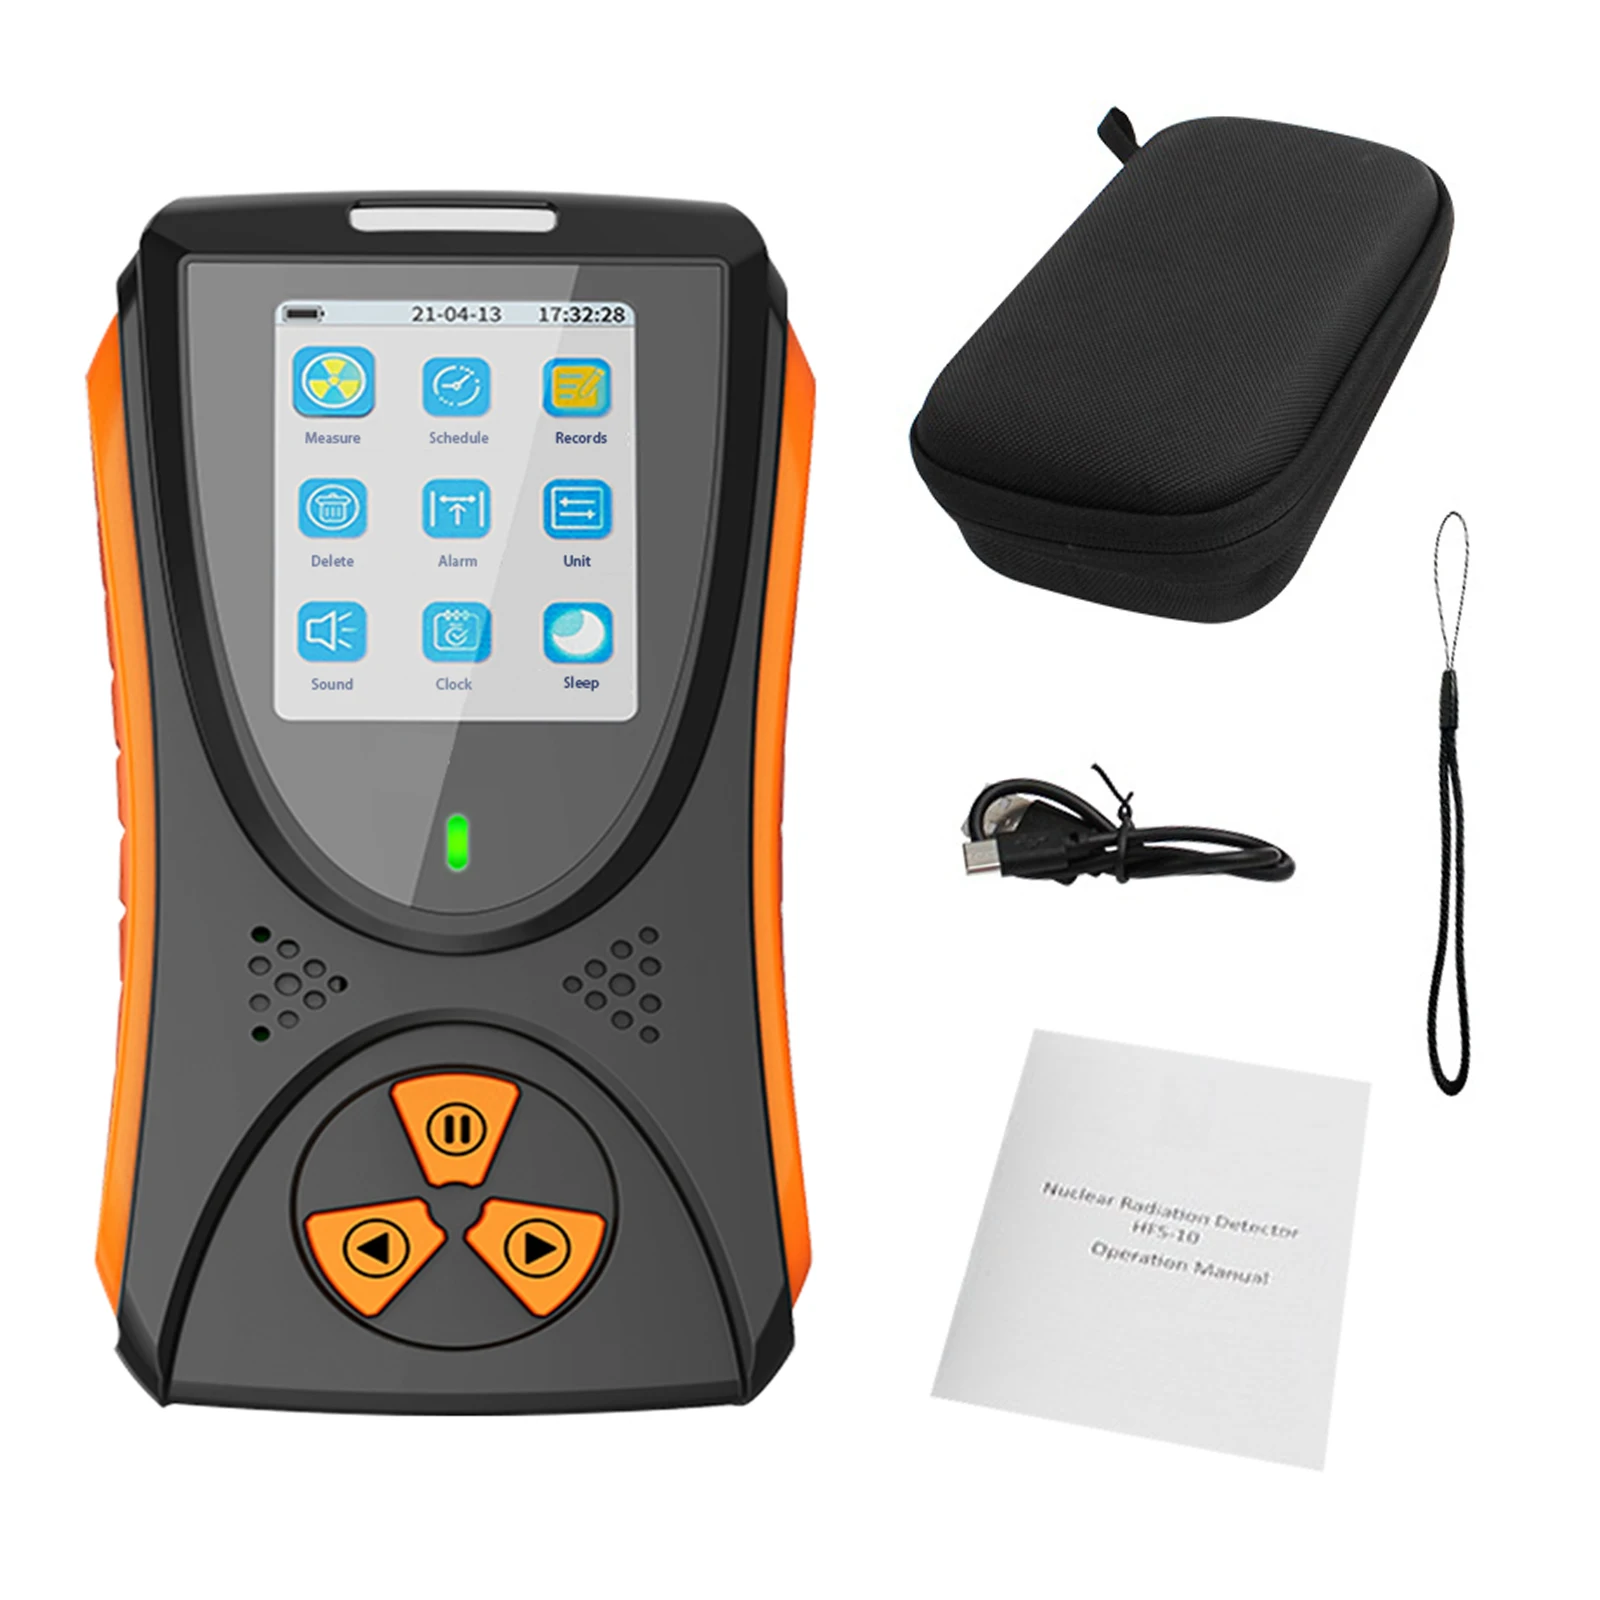 

Geiger Counter Nuclear Radiation Detector X-ray Beta Gamma Detector Geiger Counter Dosimeter LCD Screen